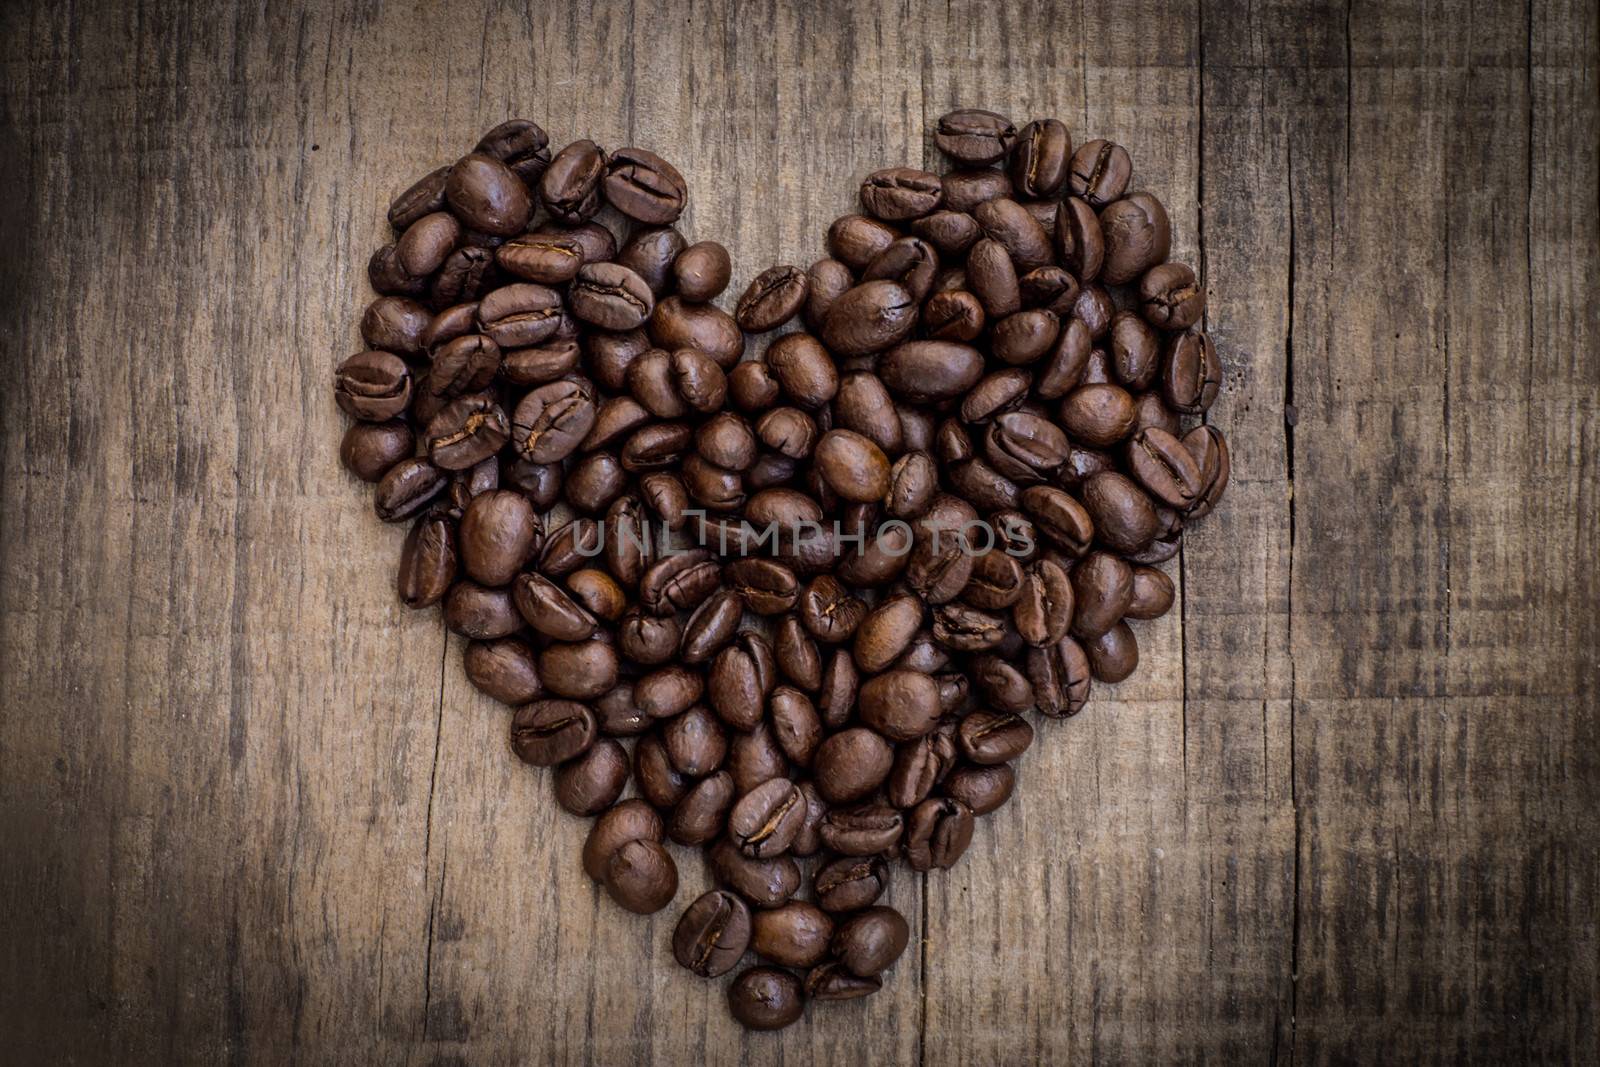 A heart shaped out of coffee beans on wood background